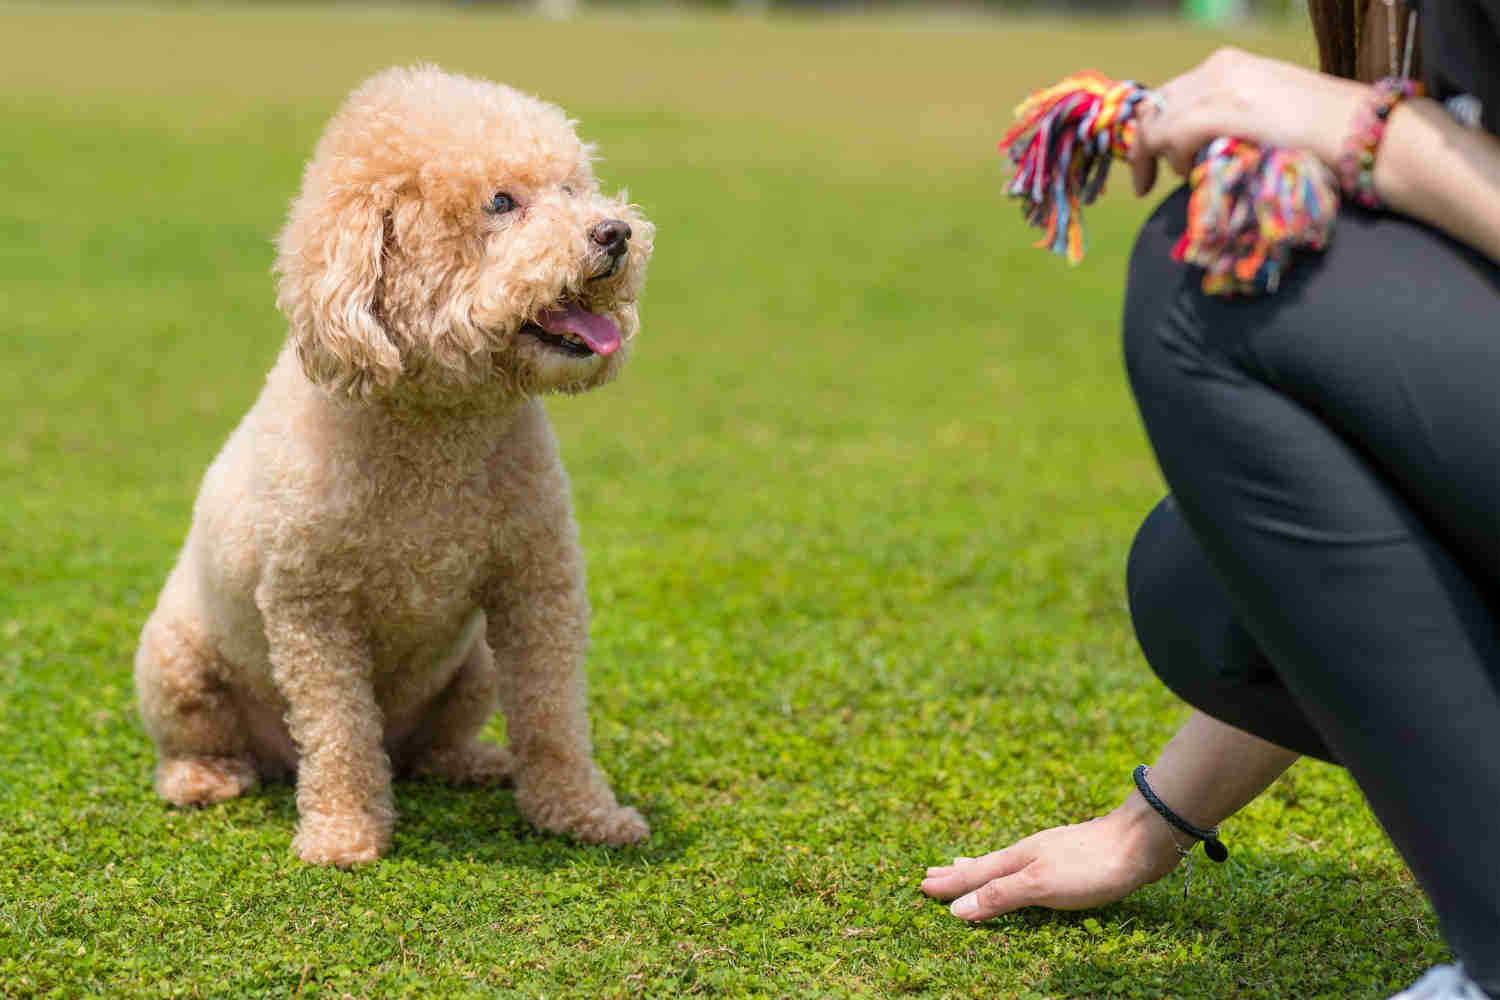 What are the recommended vaccinations and preventive measures for Poodles?